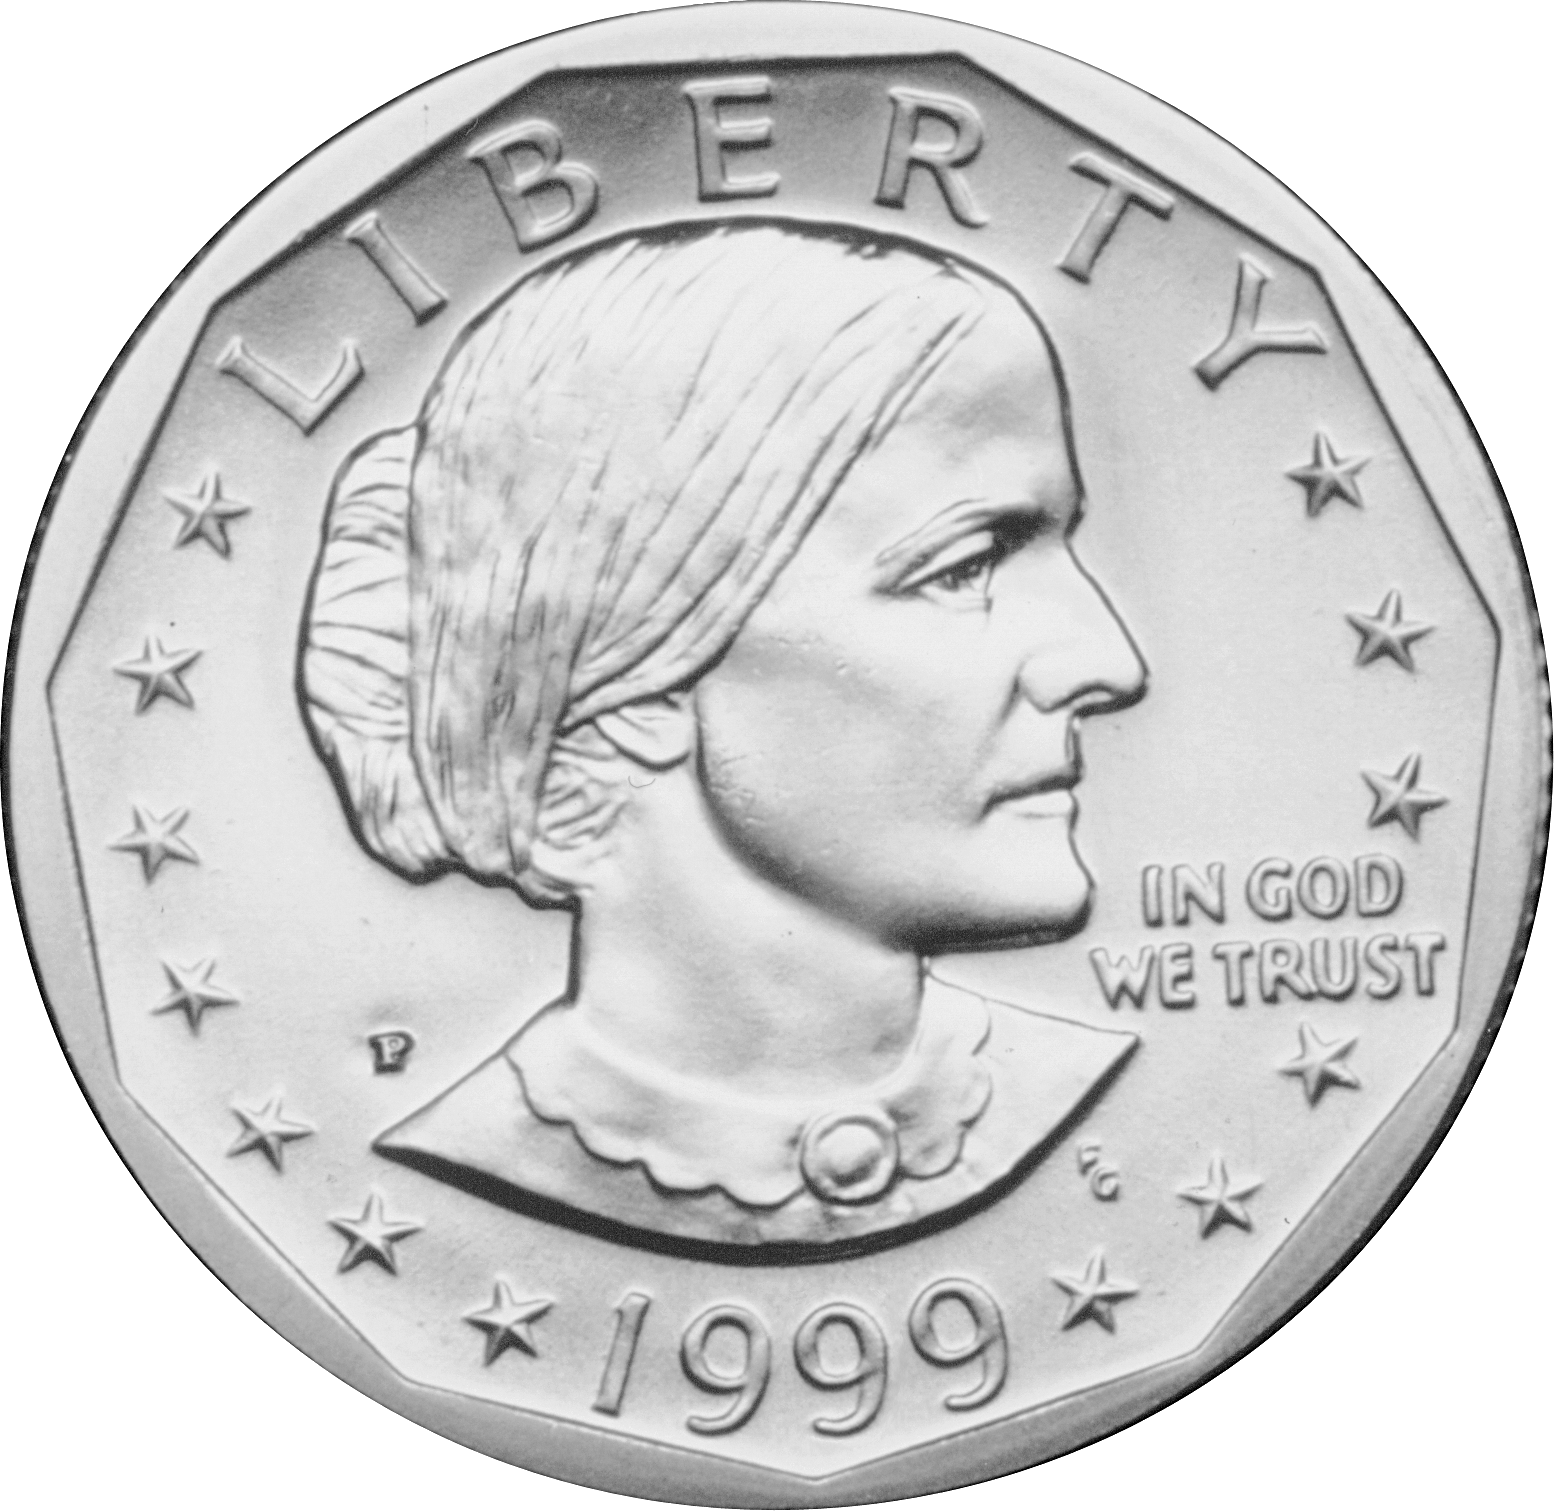 http://coins.thefuntimesguide.com/images/blogs/susan-b-anthony-obverse.png